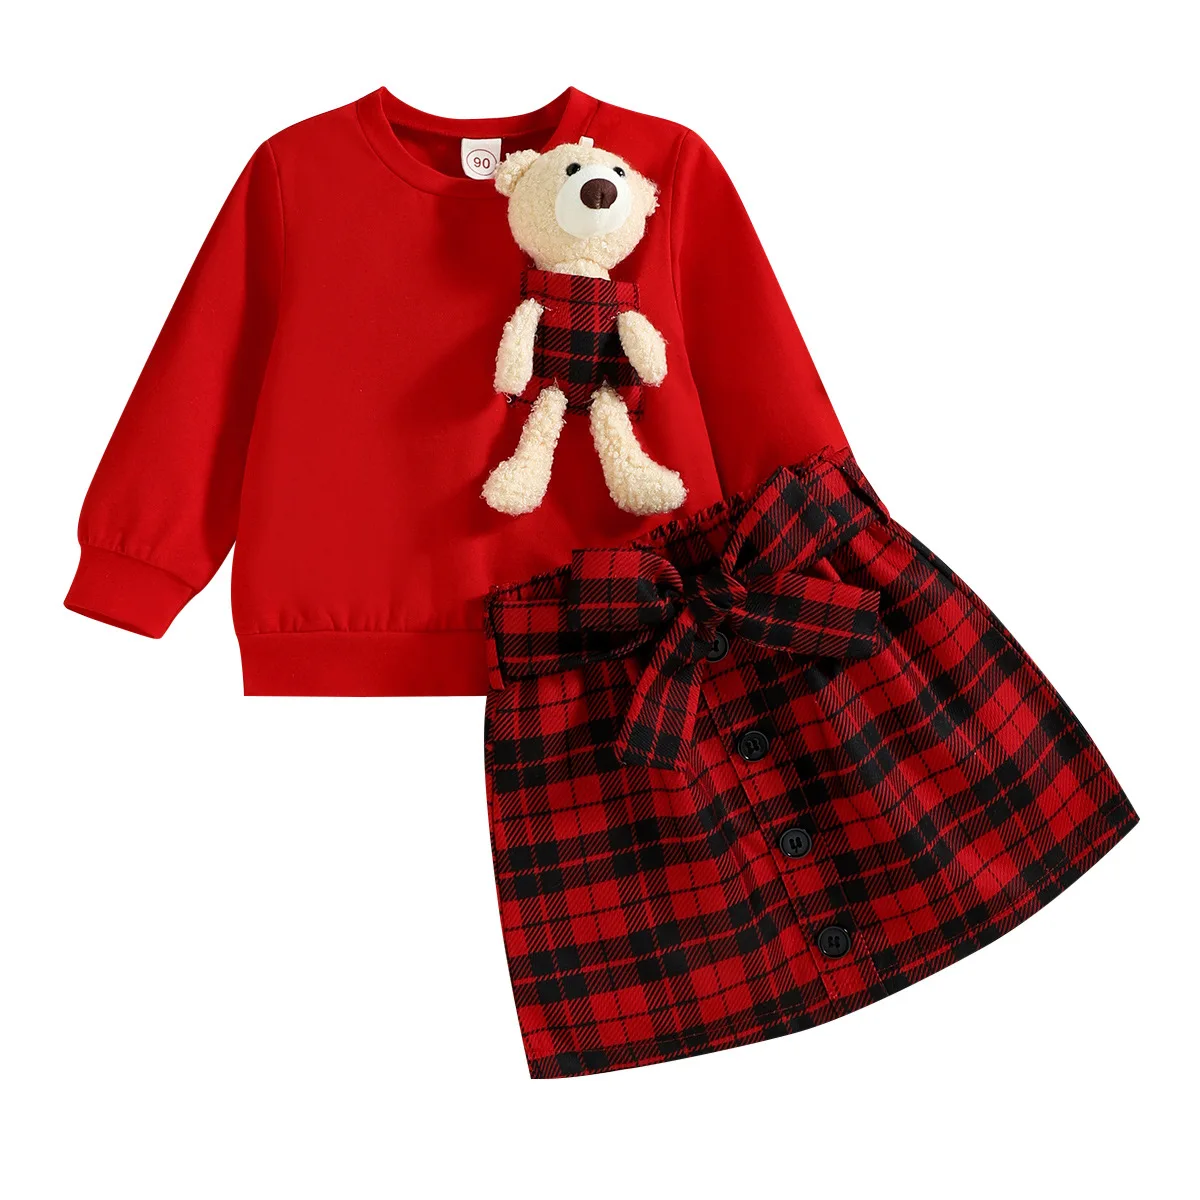 Toddler girls clothing sets Korean style sweatshirt tops+plaid skirt fashion two piece children fall outfits kids clothes